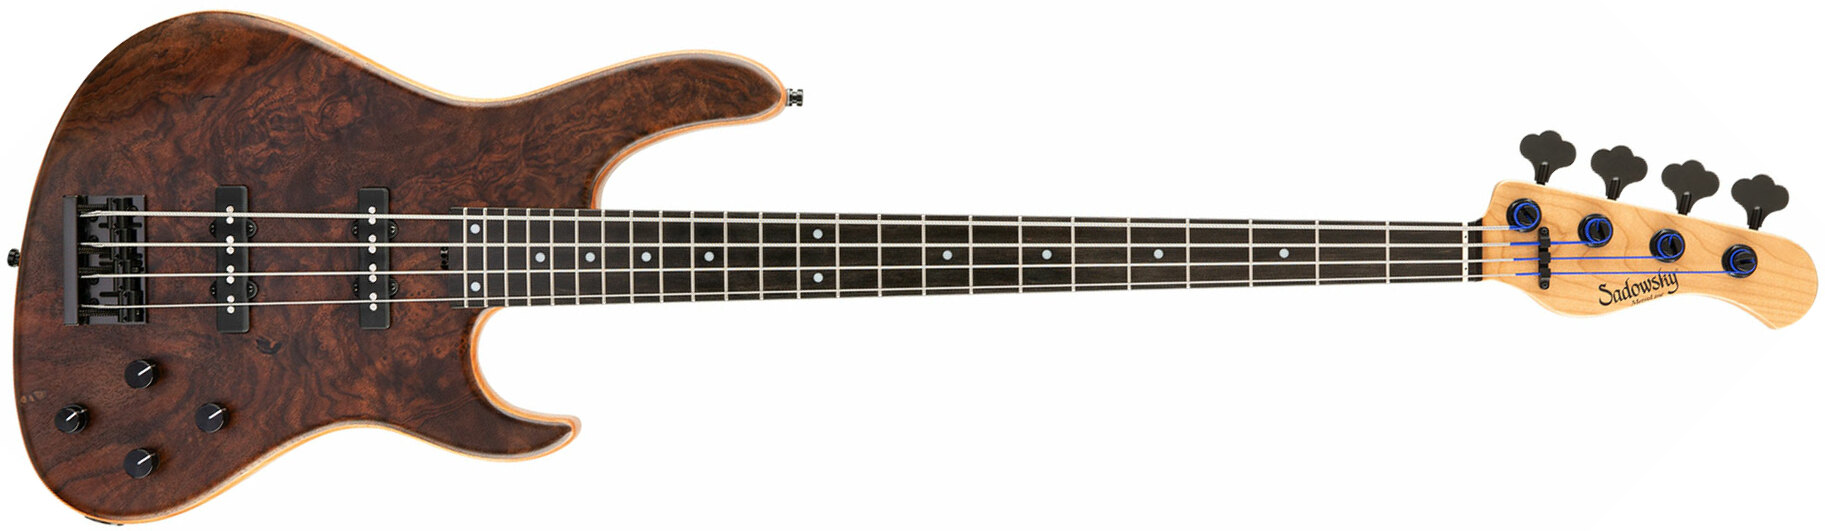 Sadowsky Modern Bass 24 Frets 4c Metroline Ltd 2021 All Okoume Active Mor - Natural - Solid body electric bass - Main picture